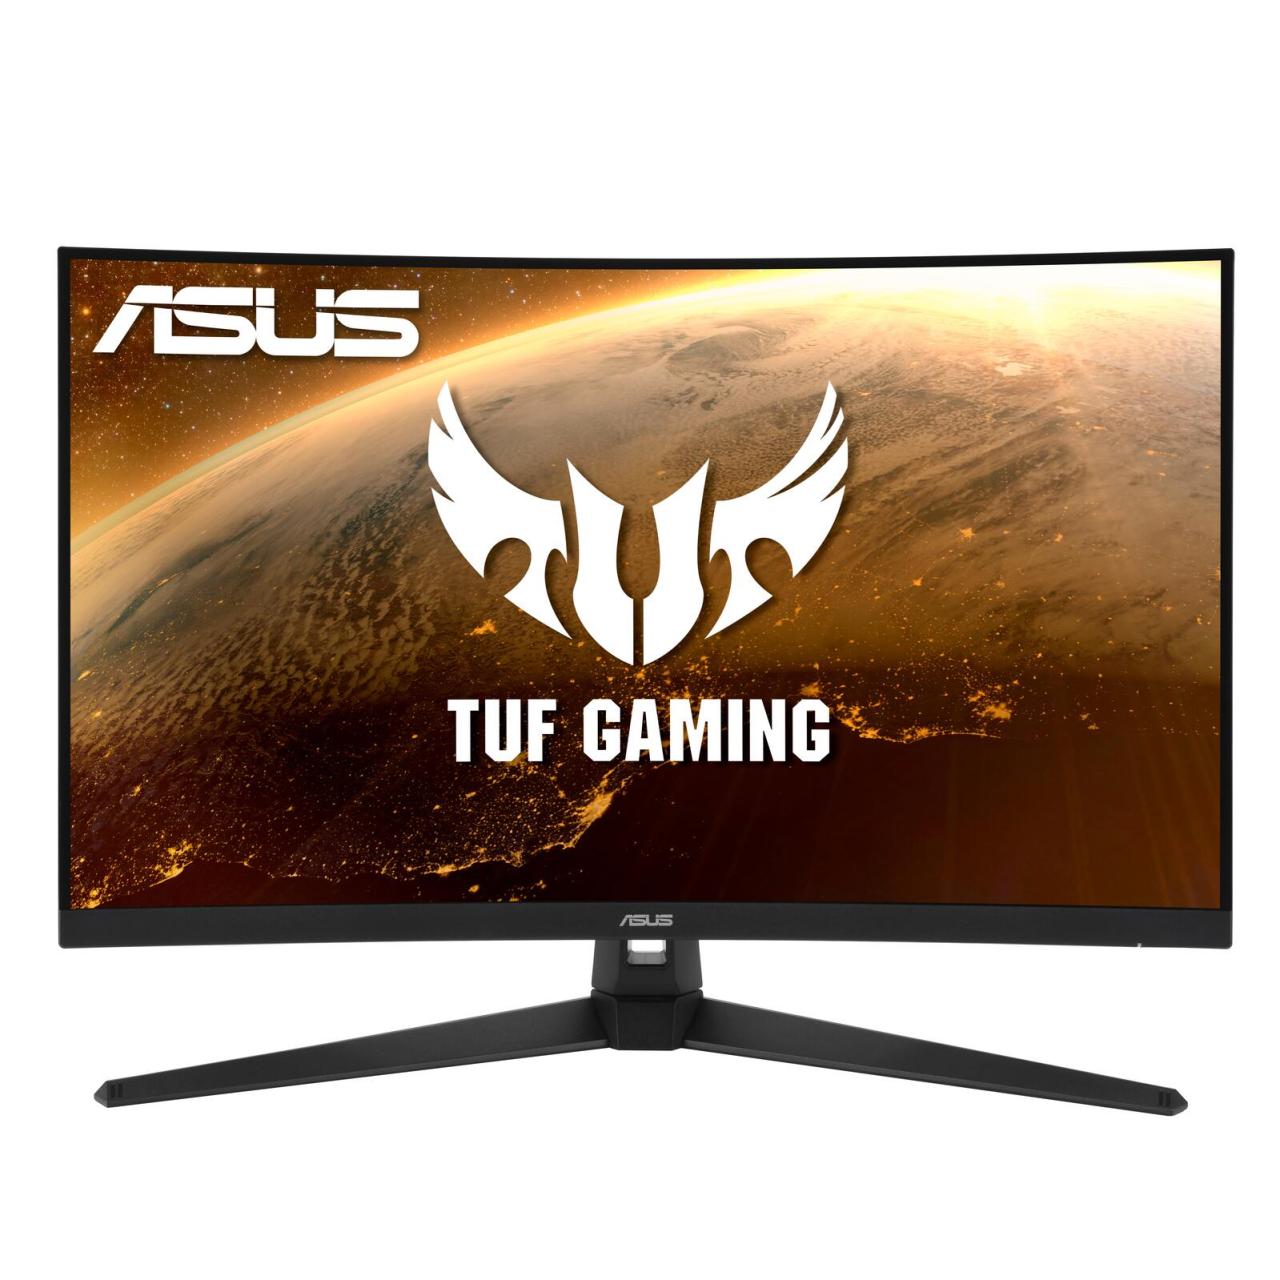 ASUS TUF GAMING VG32VQ1BR Curved Gaming Monitor 80,01 cm (31,5 Zoll) von ASUS